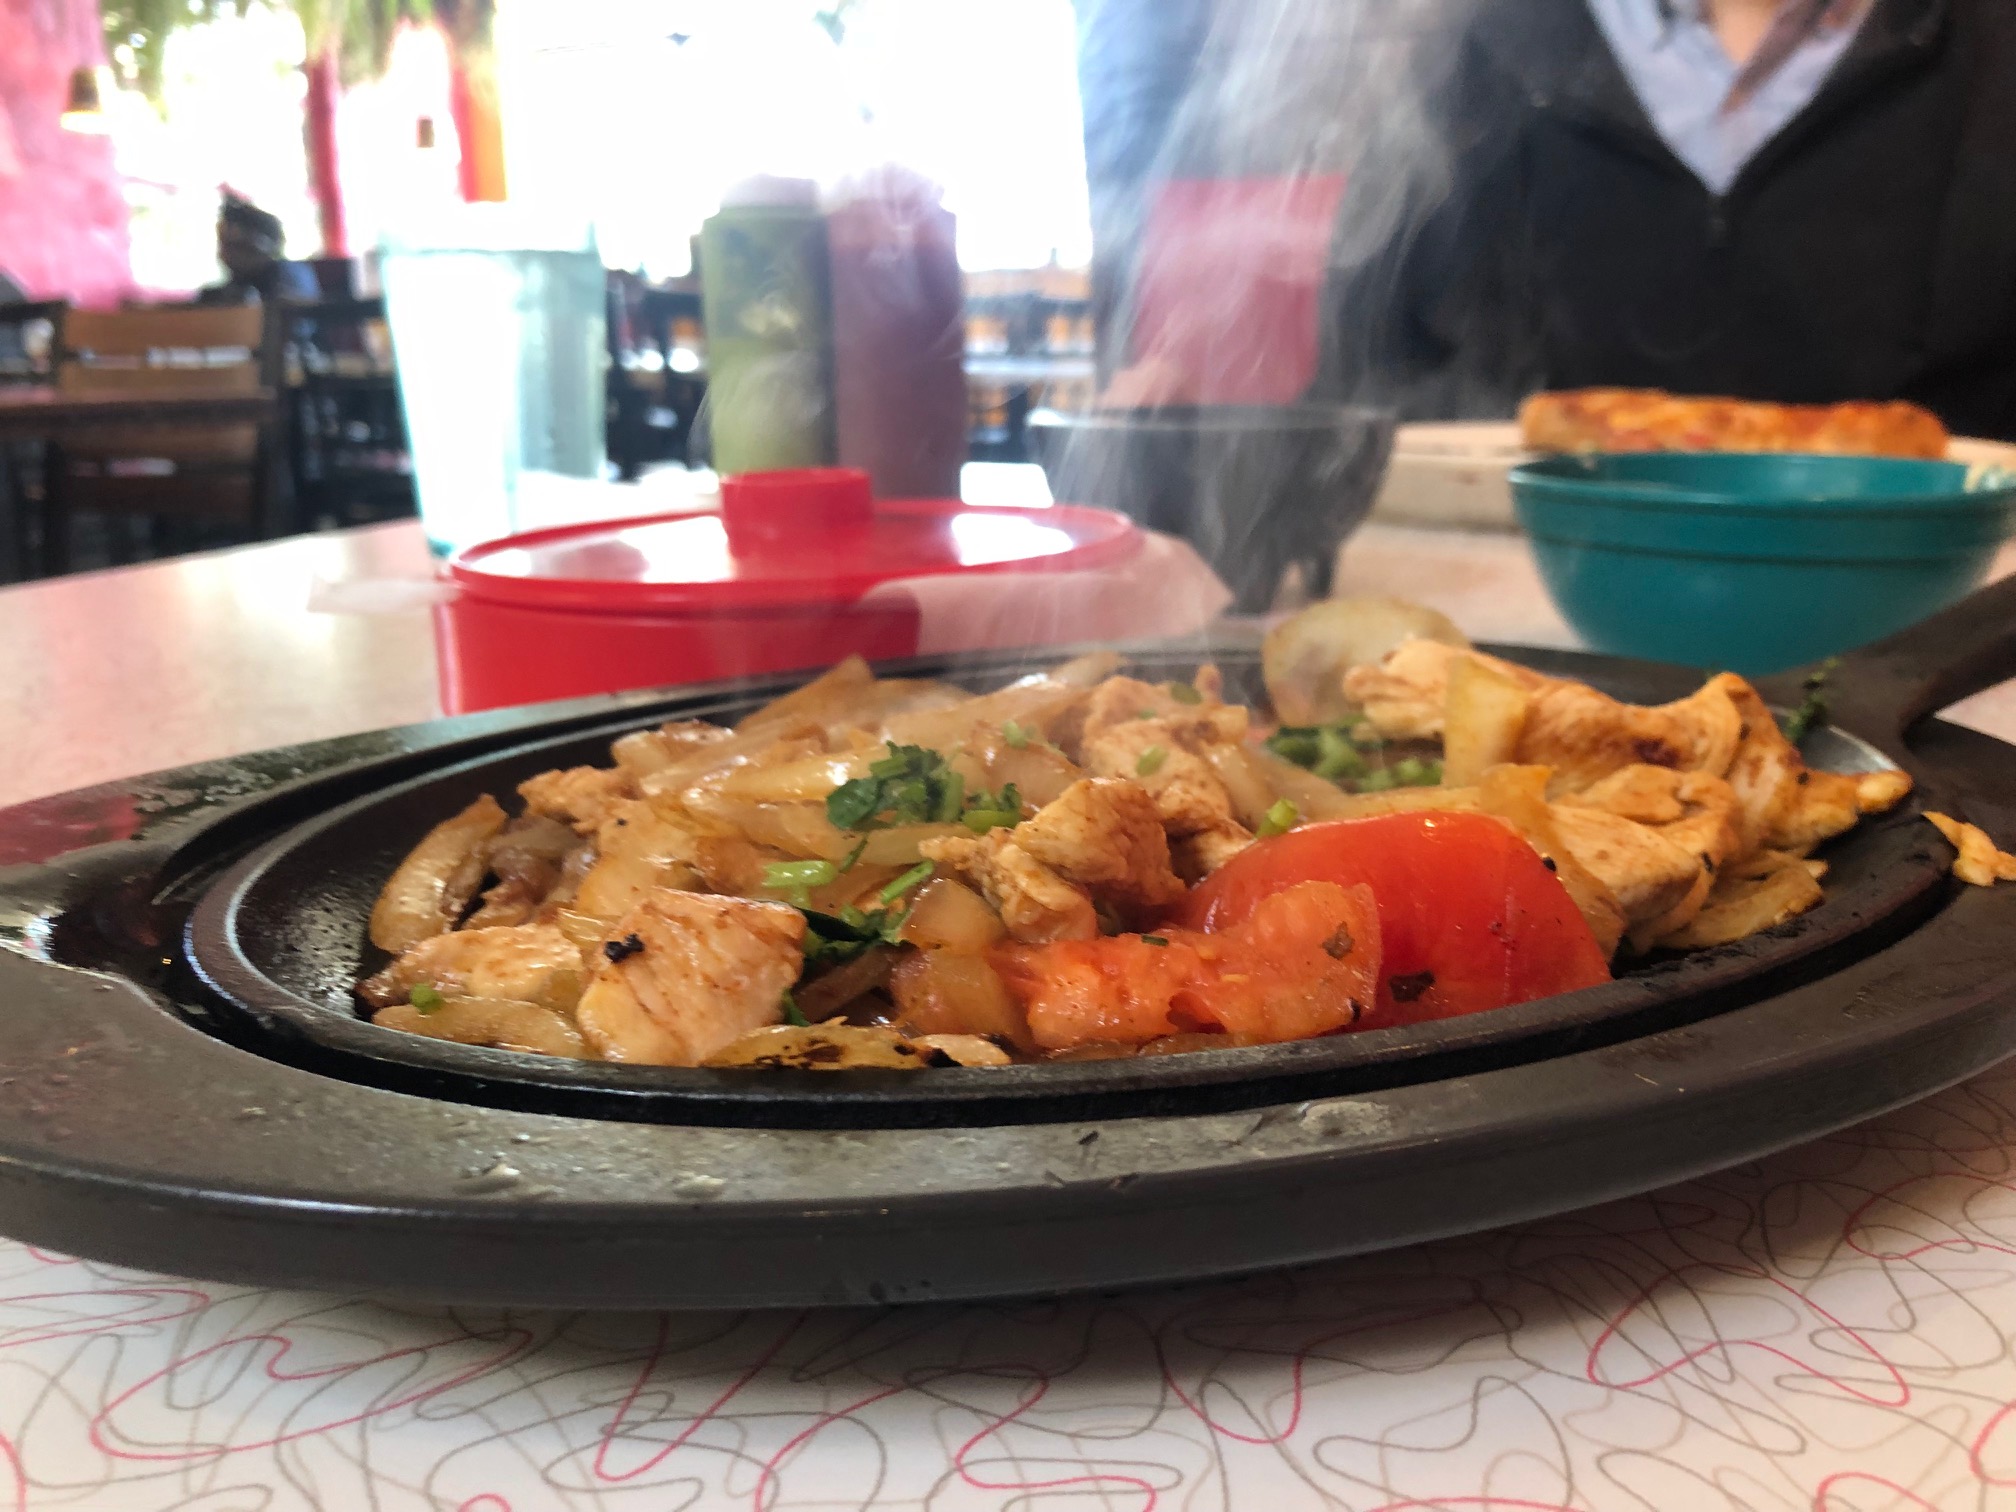 On a retro table, there is a fajita skillet with chicken, onions, tomato, and cilantro on top. There is steam coming off the top. Photo by Alyssa Buckley.